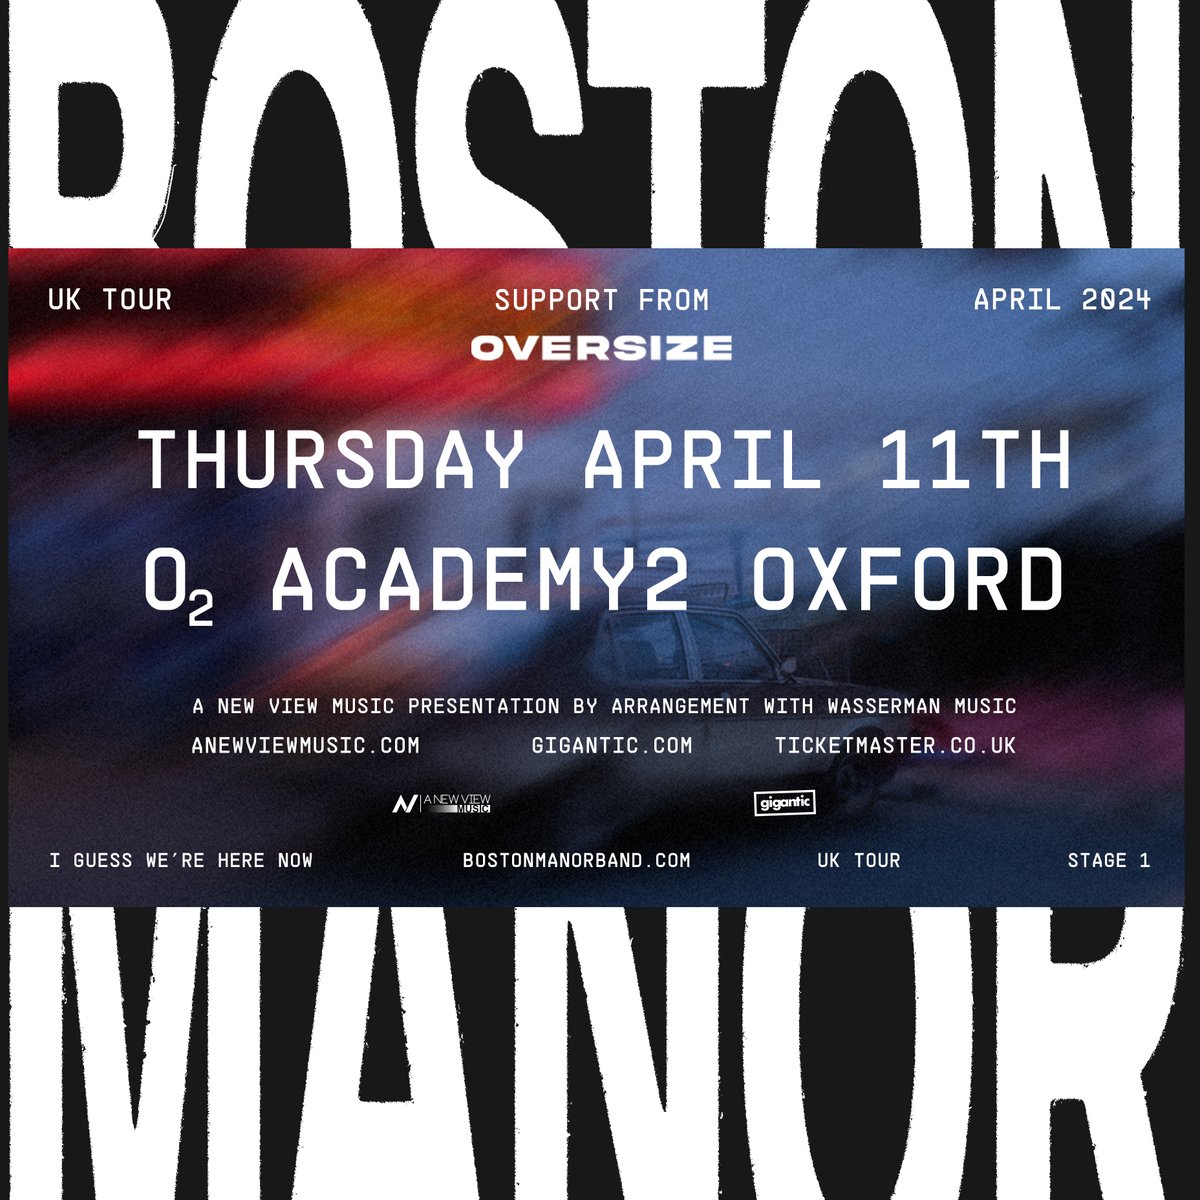 Who's coming to see @BSTNMNR tonight? 🙋 Support from @oversizebandxl. Doors at 7pm. Our usual security measures are in place - no bags bigger than A4 - please check our pinned tweet for details 🙏